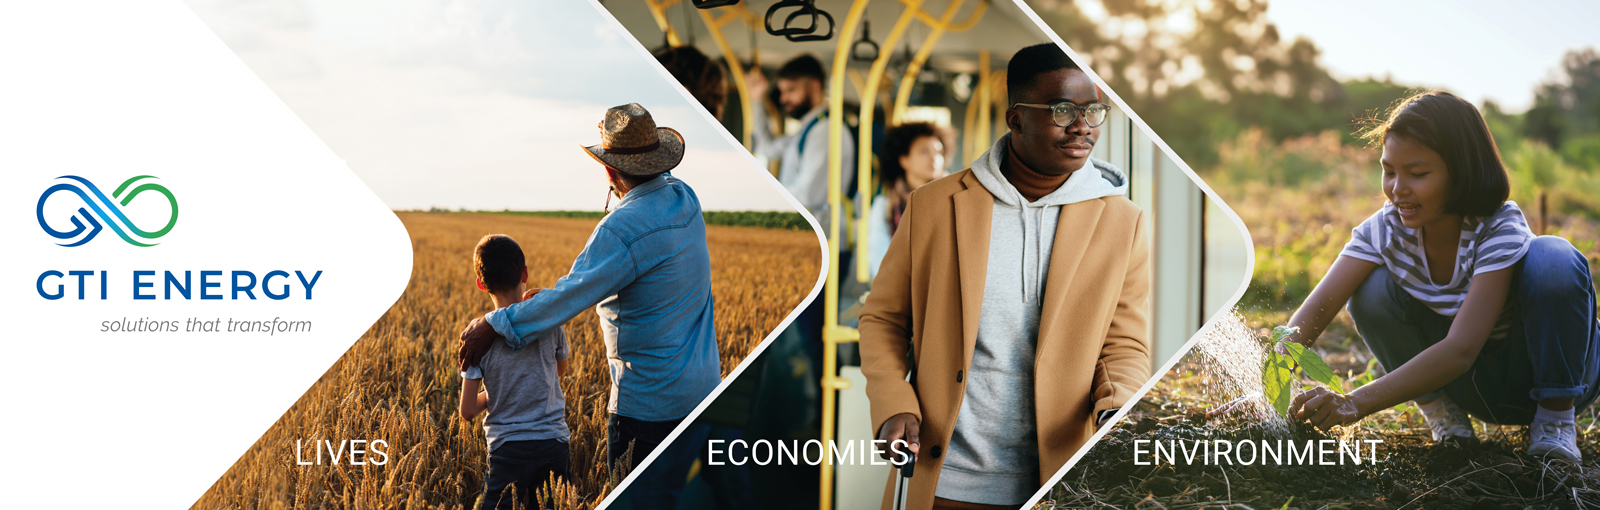 collage of a man wearing a cowboy hat with his arm around a child looking over a wheat field, a man in a brown jacket on standing on a commuter train looking out a window and a young girl planting a vegetable plant while it is being watered. With the GTI Energy logo and the words Lives, Economies and Environment written along the bottom.